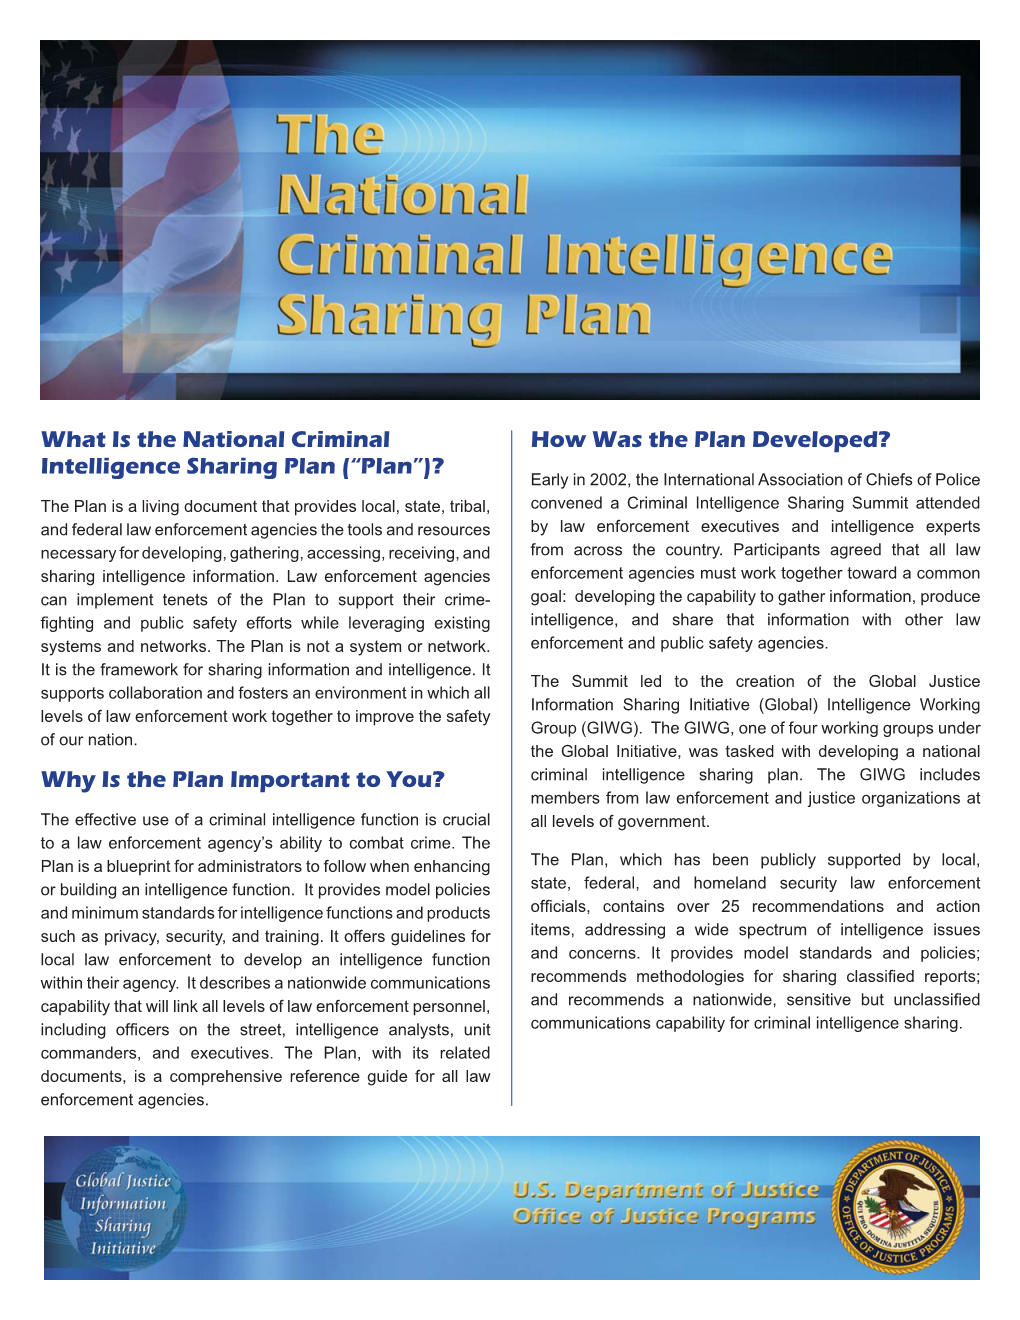 What Is the National Criminal Intelligence Sharing Plan